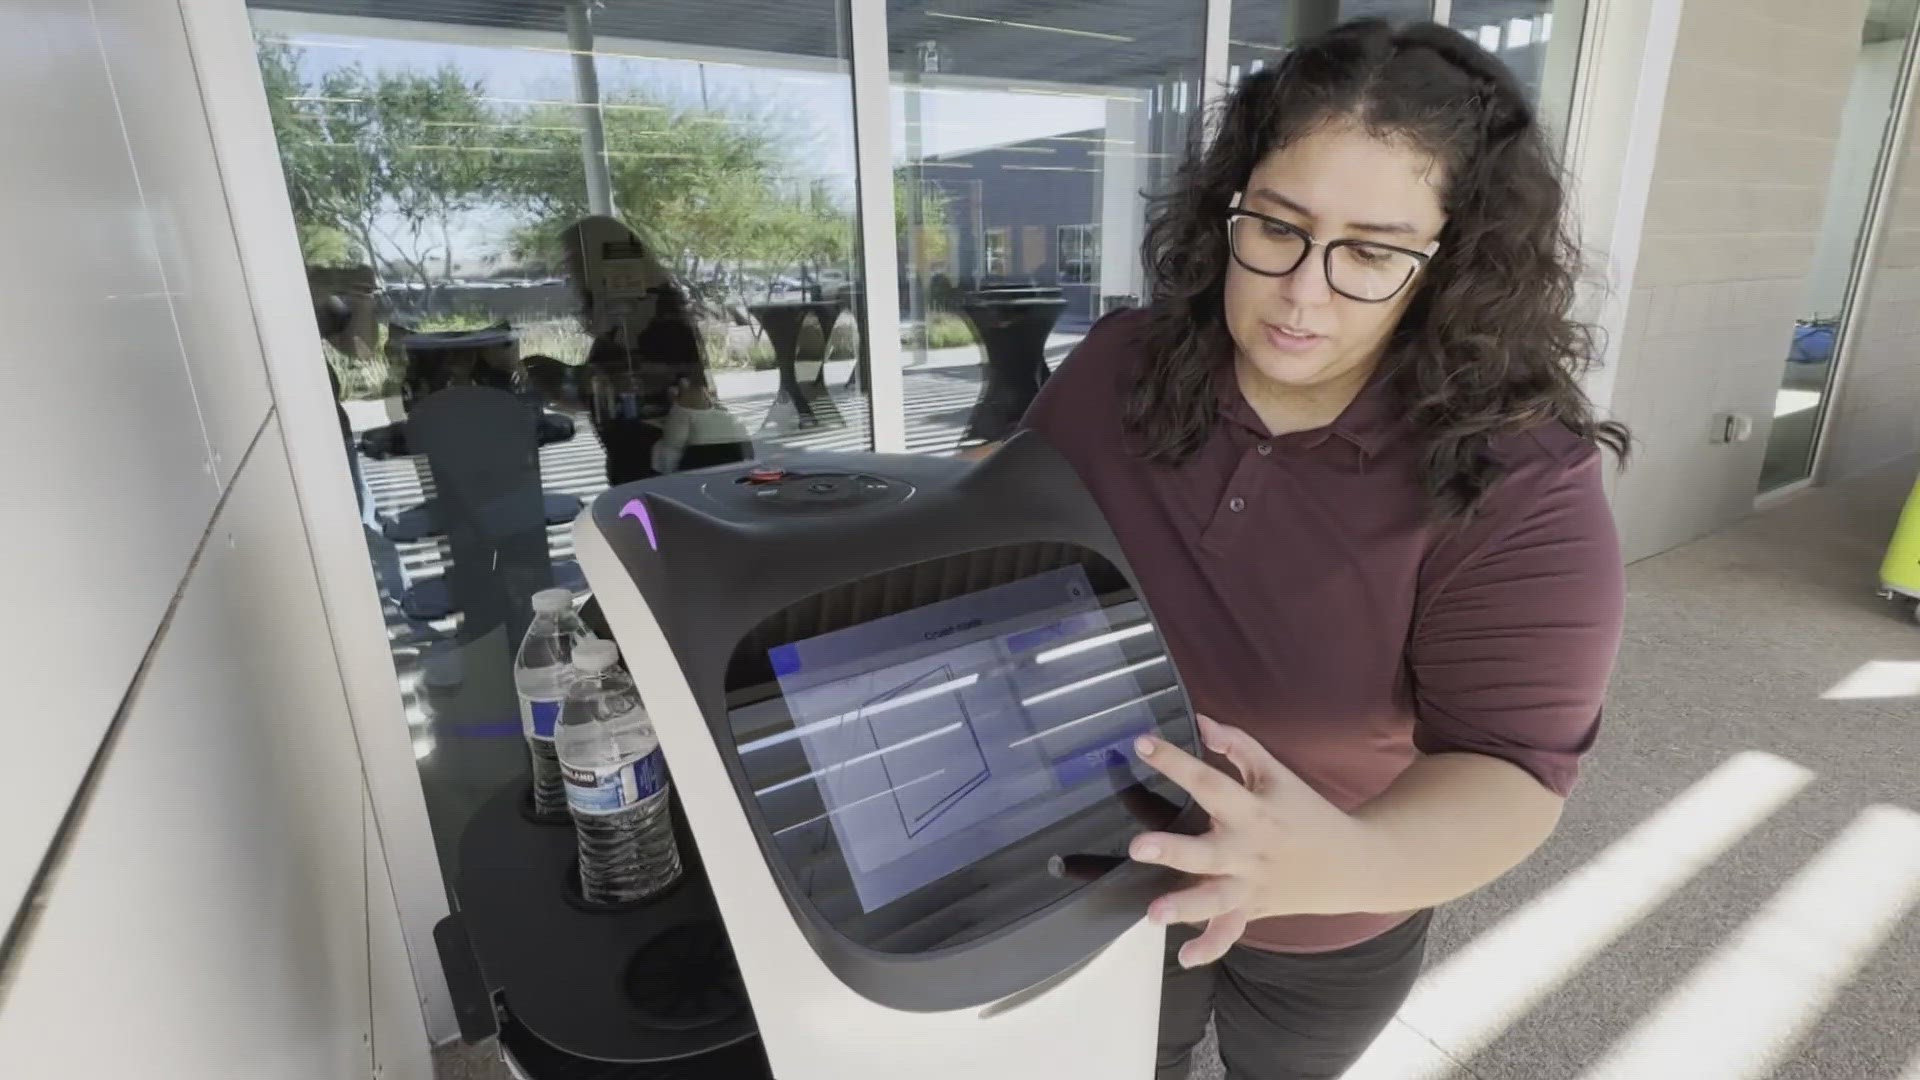 Compared to a traditional four-year degree, Chandler-Gilbert offers a less expensive, faster way for students to jump into the growing A.I. workforce.